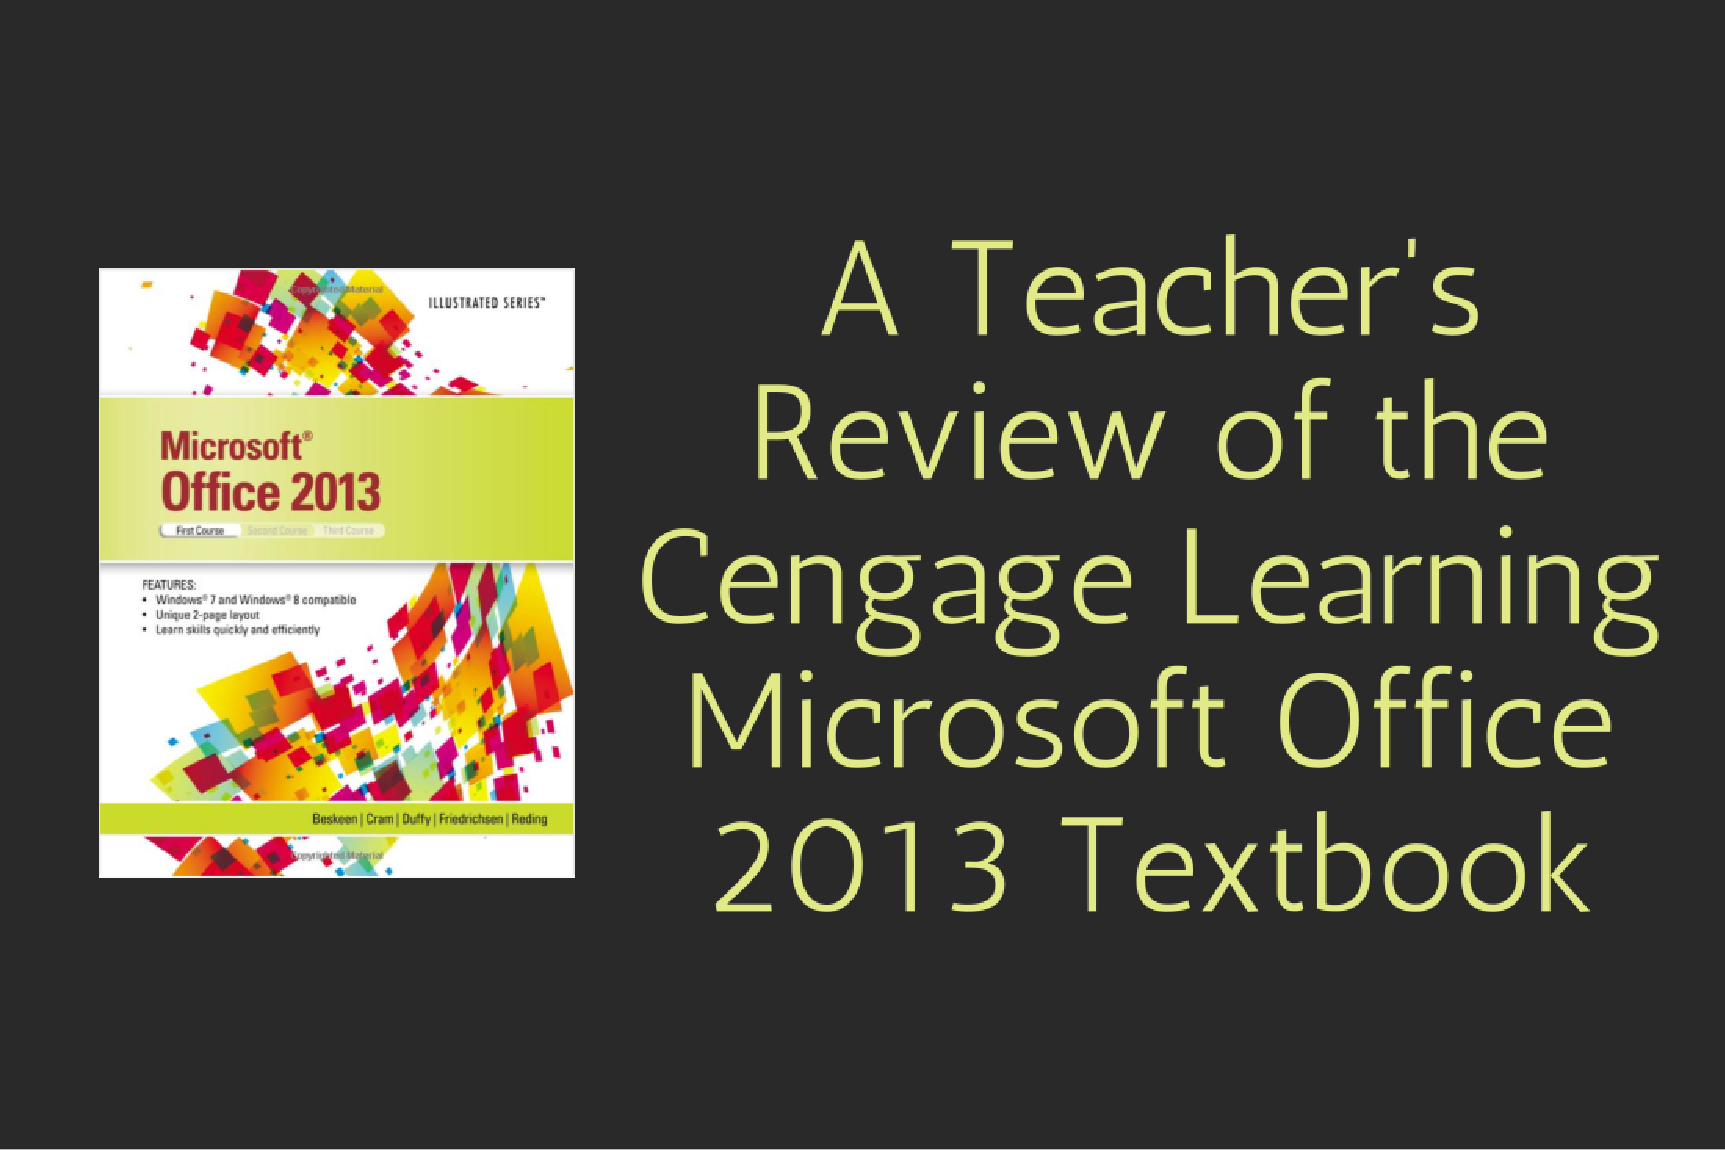 One Computer Teacher's Massive Review of a Cengage Middle School Textbook